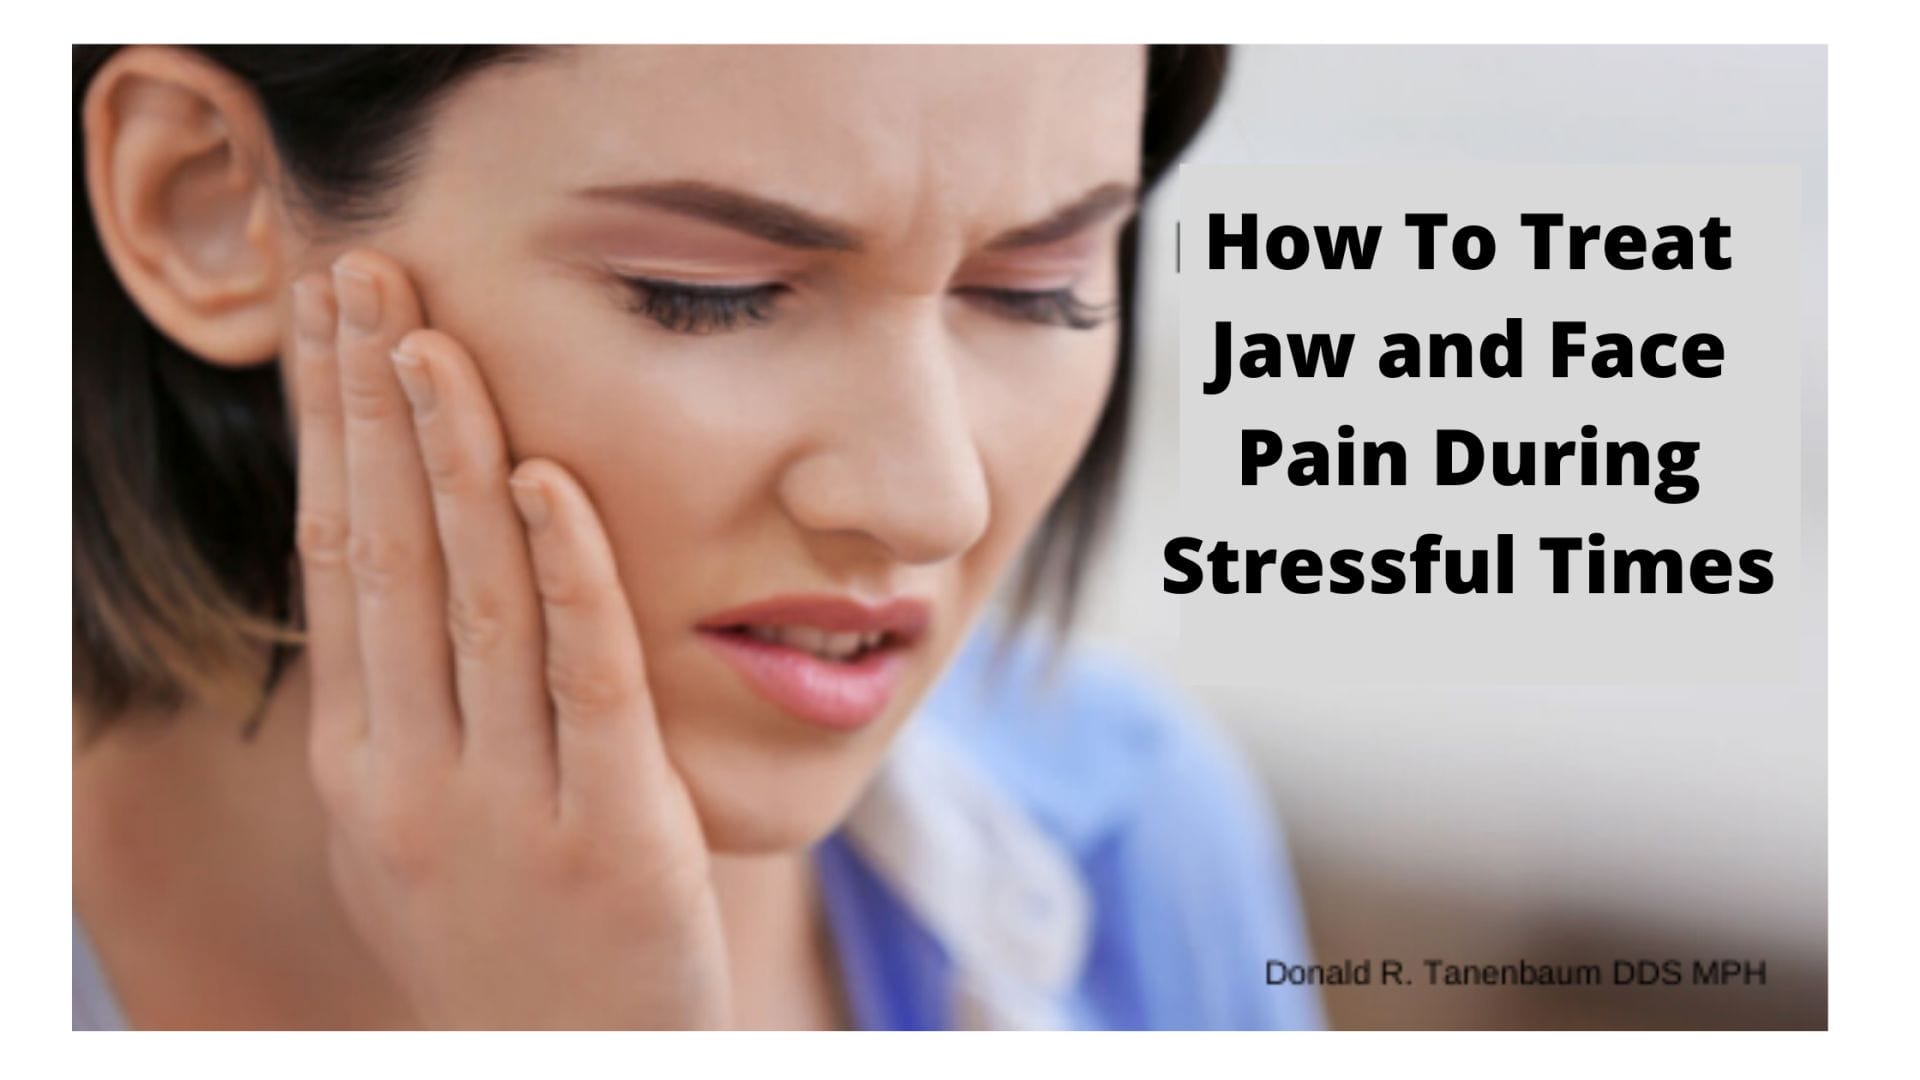 https://eqv9a2yvezt.exactdn.com/wp-content/uploads/2020/03/How-To-Treat-Jaw-and-Face-Pain-During-Stressful-Times.png